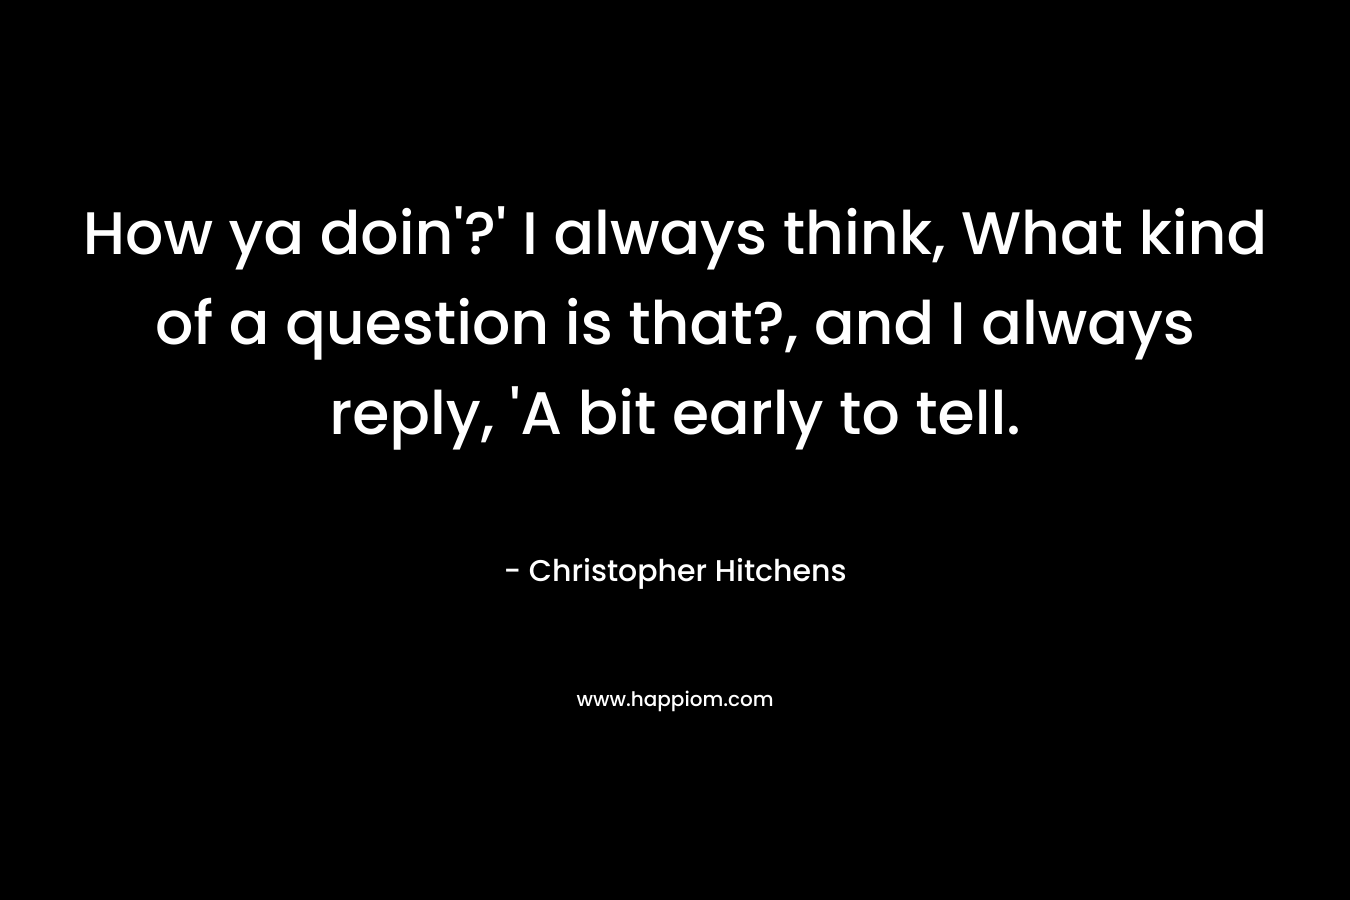 How ya doin’?’ I always think, What kind of a question is that?, and I always reply, ‘A bit early to tell. – Christopher Hitchens